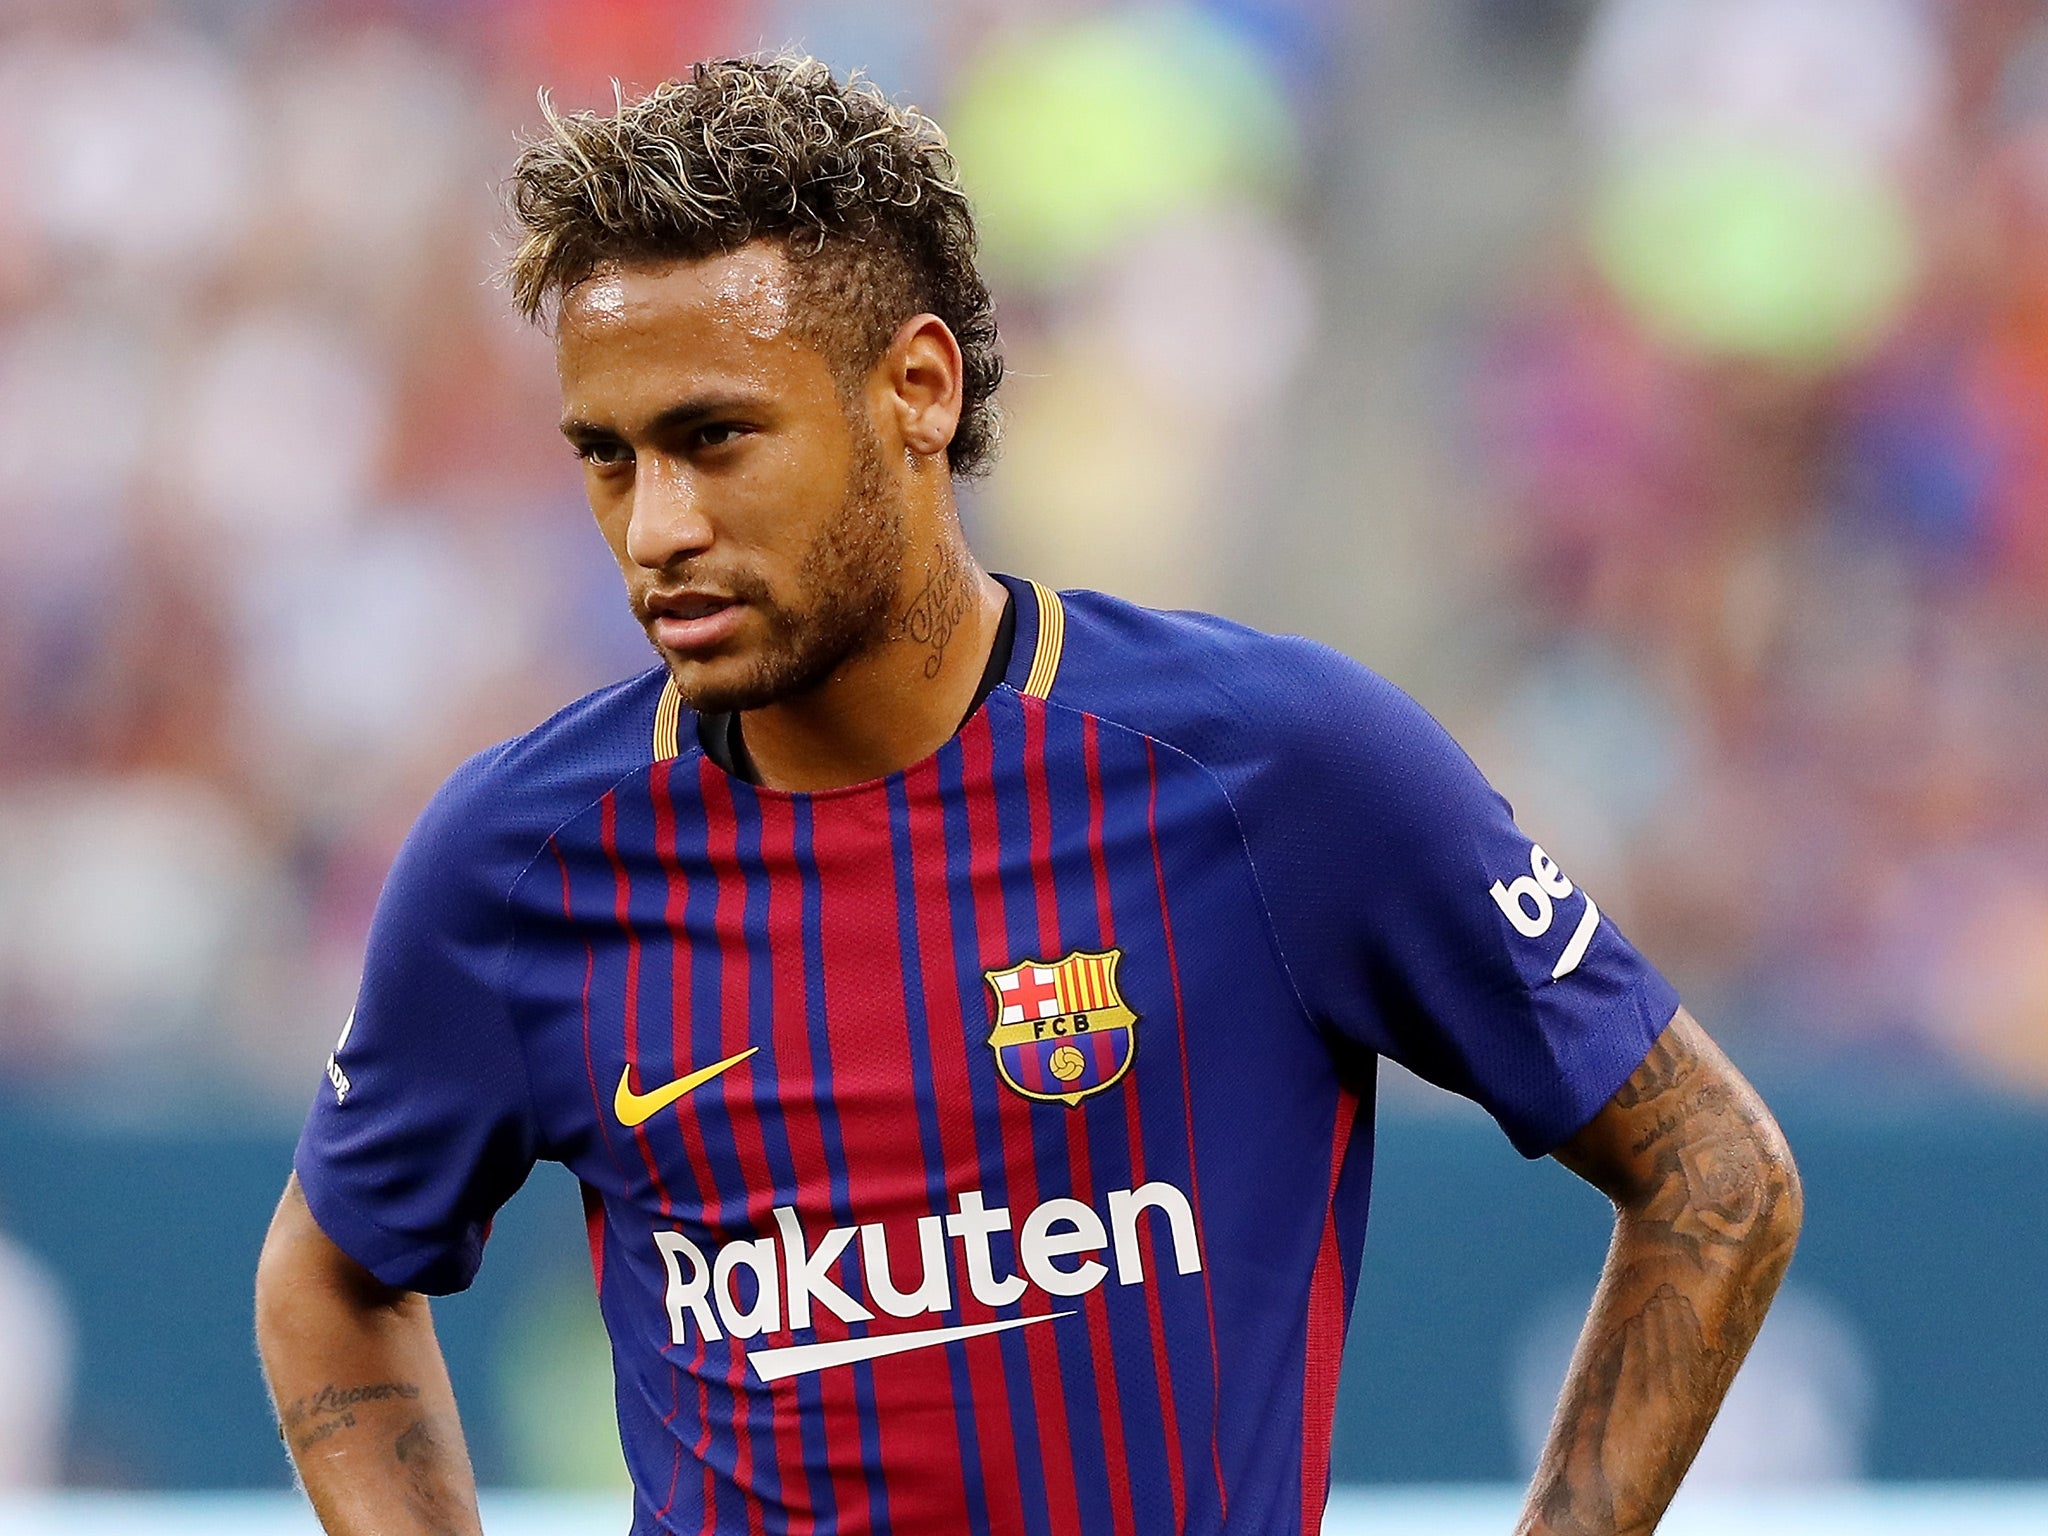 According to Andre, Neymar is not sure whether to stay or go